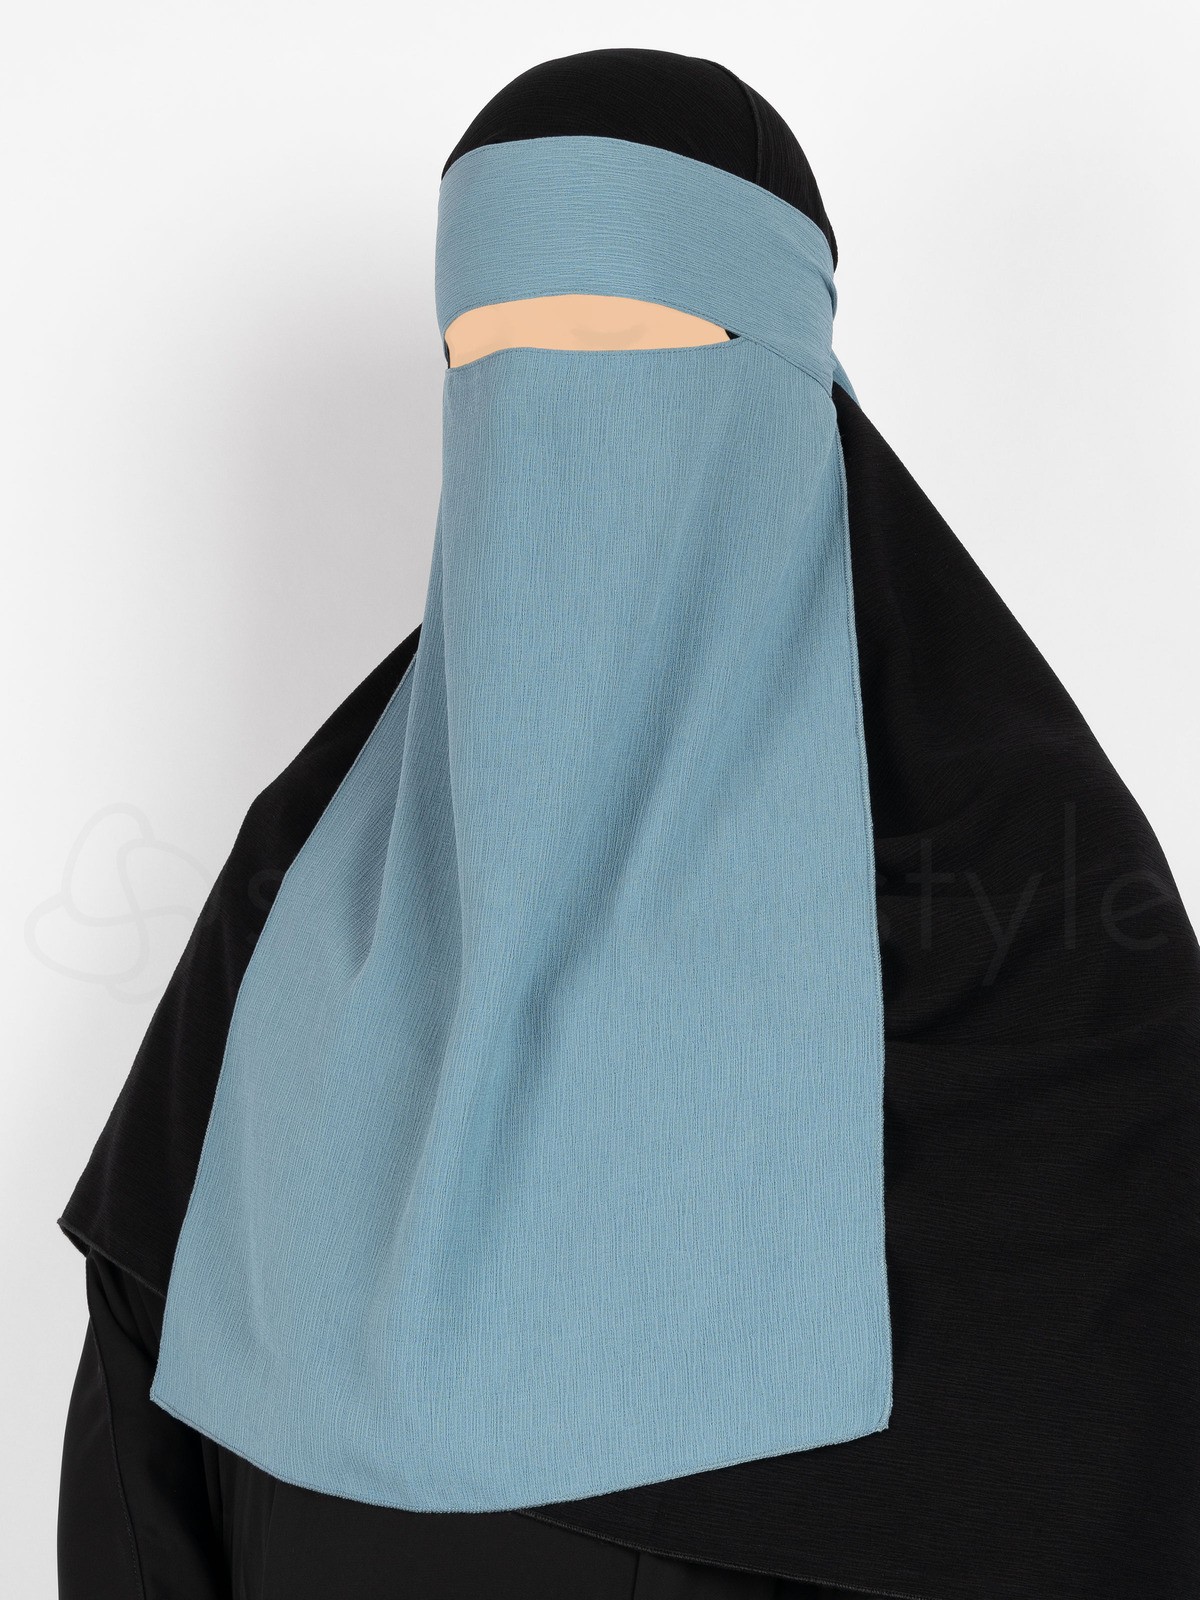 Sunnah Style - Brushed One Layer Niqab (Sky Blue)